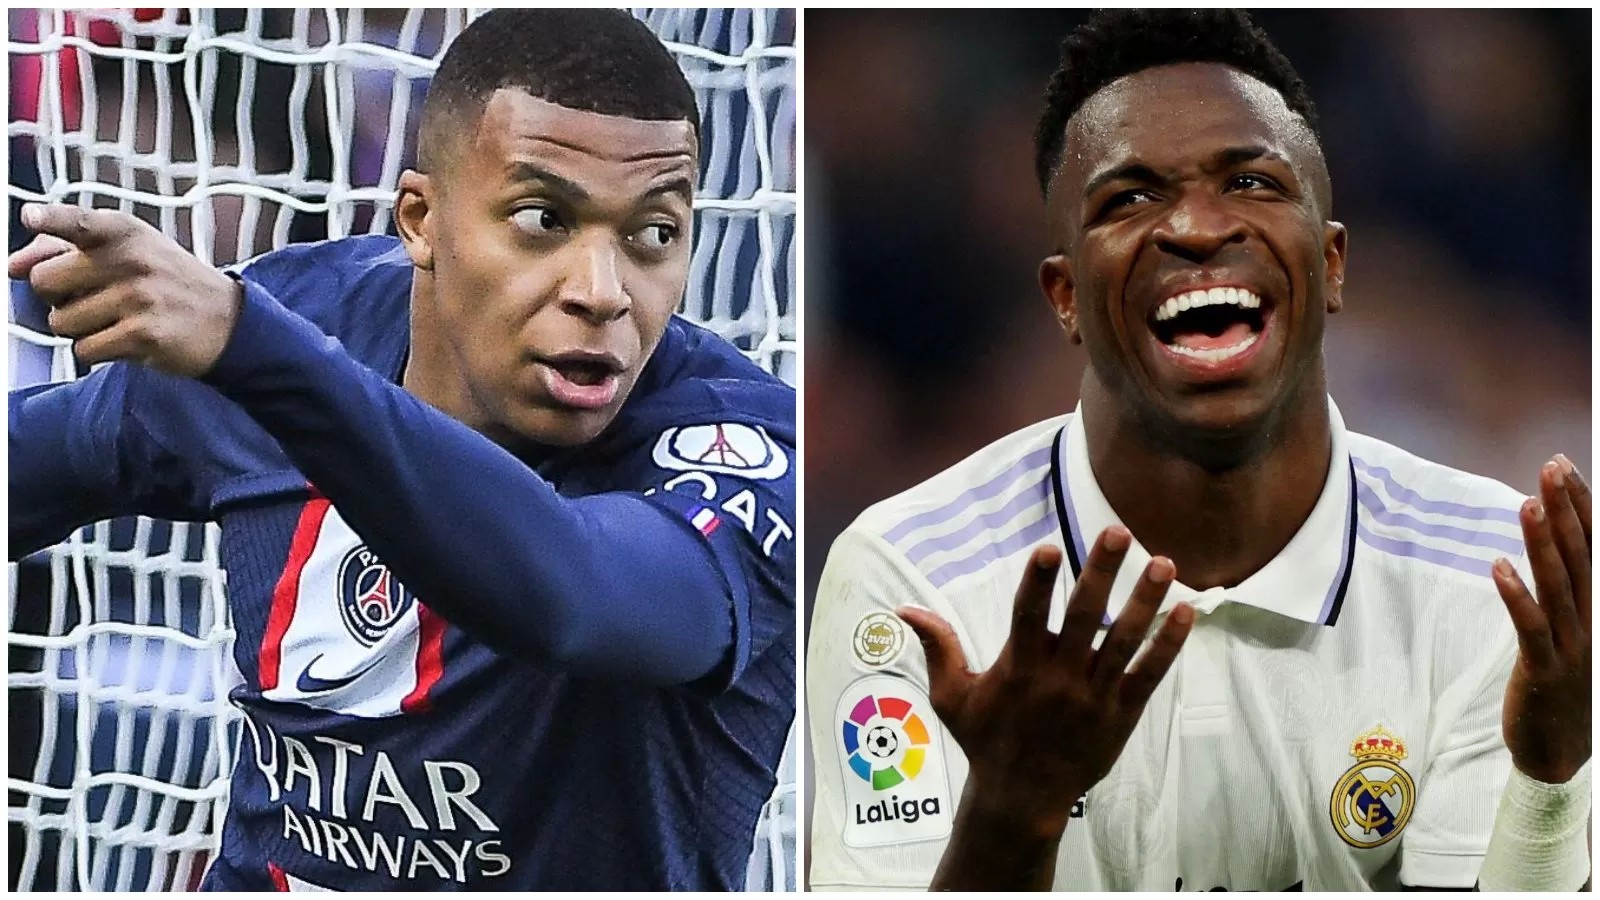 Transfer gossip: Kylian Mbappe and Vinicius Jr to link up in Man Utd’s attack?